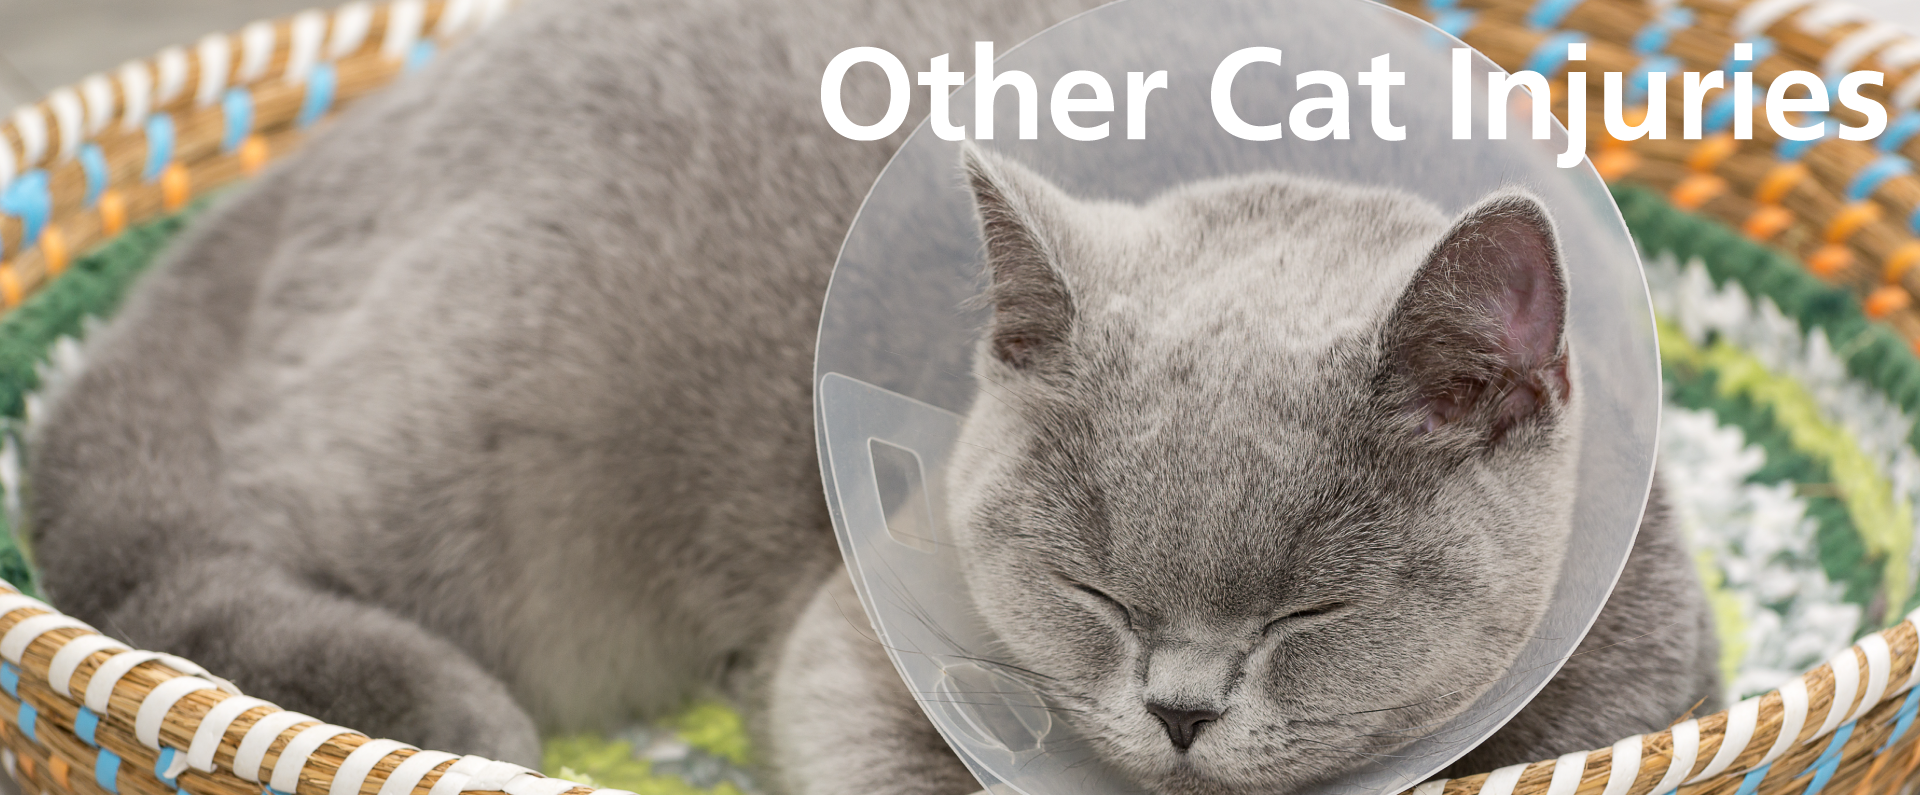 Cat first aid - Other cat injuries